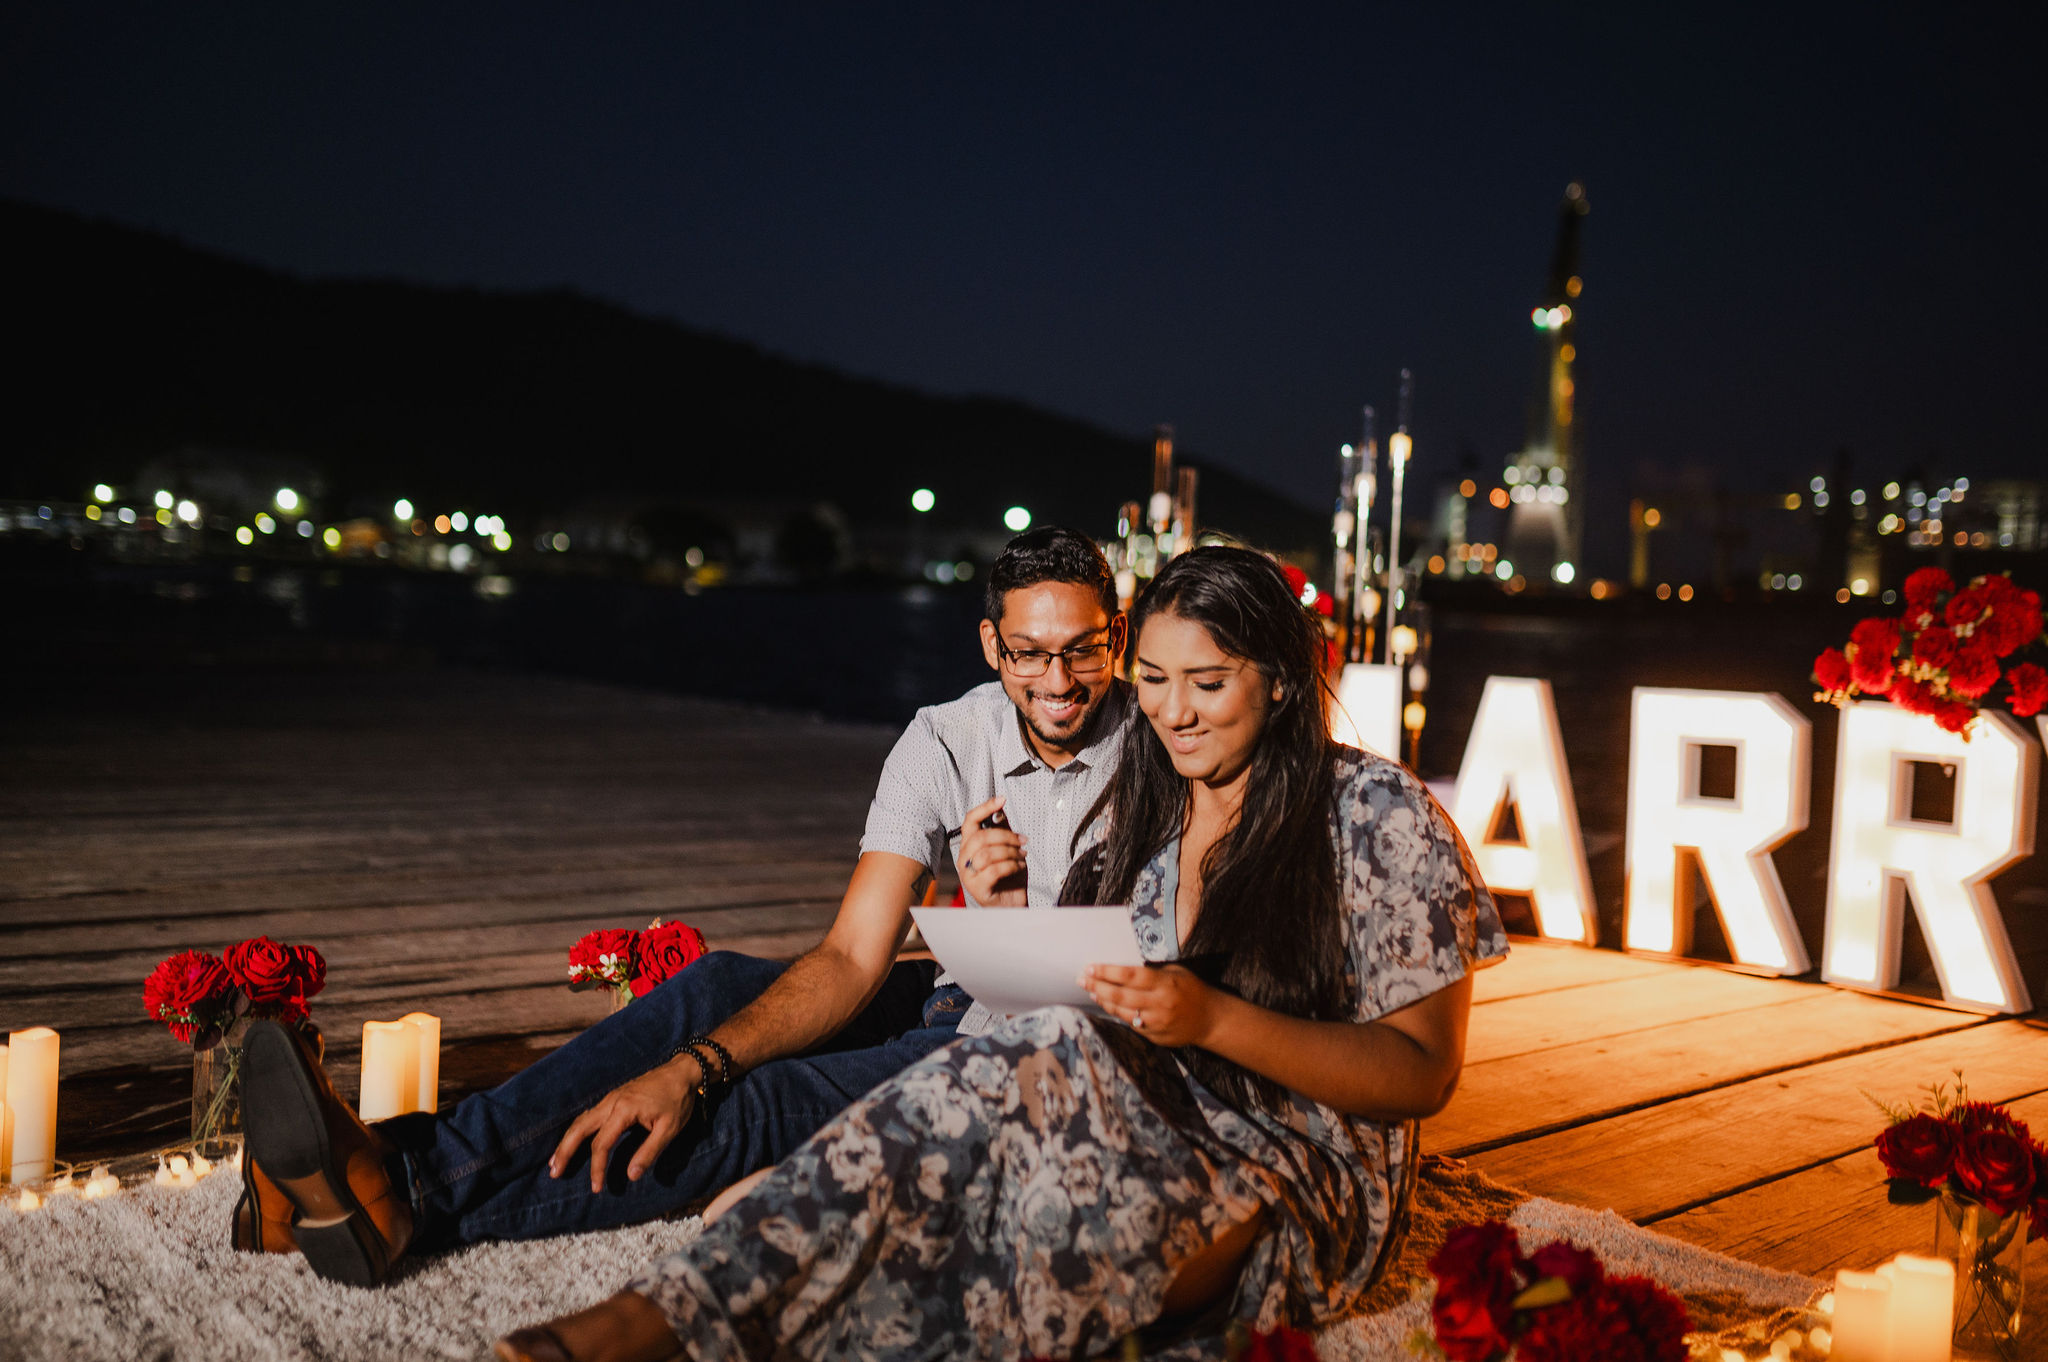 You are currently viewing The Best Valentine’s Day Proposal Ideas in Trinidad & Tobago